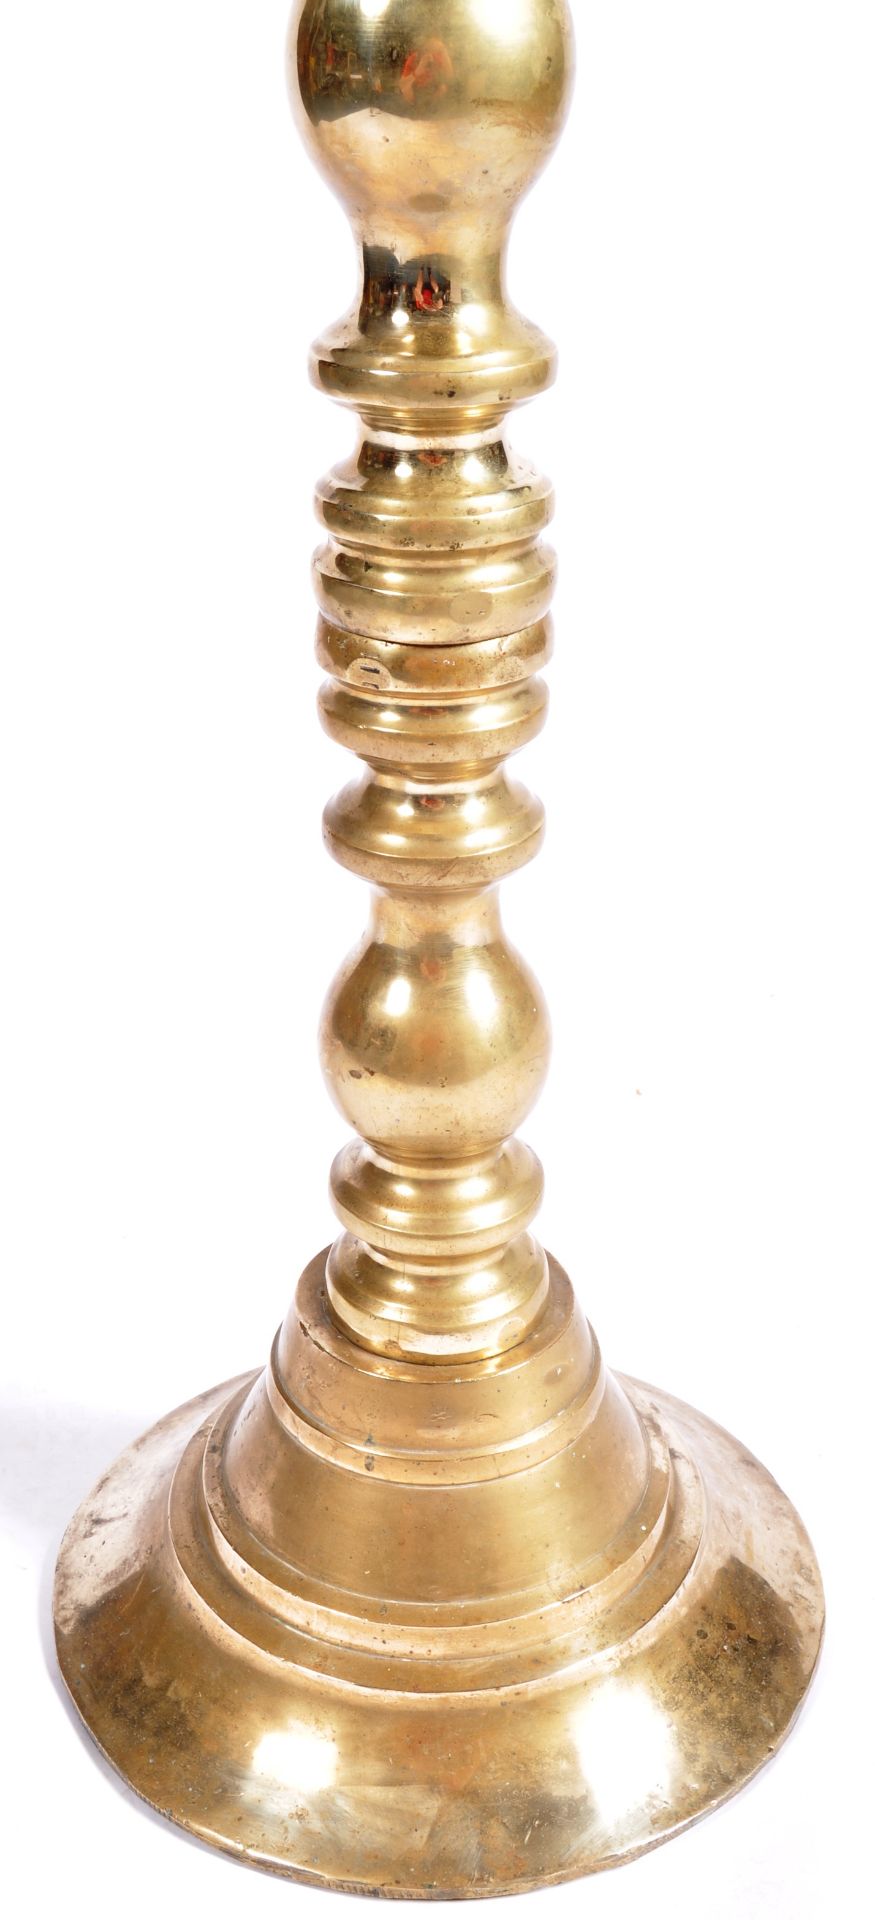 LARGE HEAVY FLOOR STANDING DUTCH CANDLESTICK - Image 5 of 7